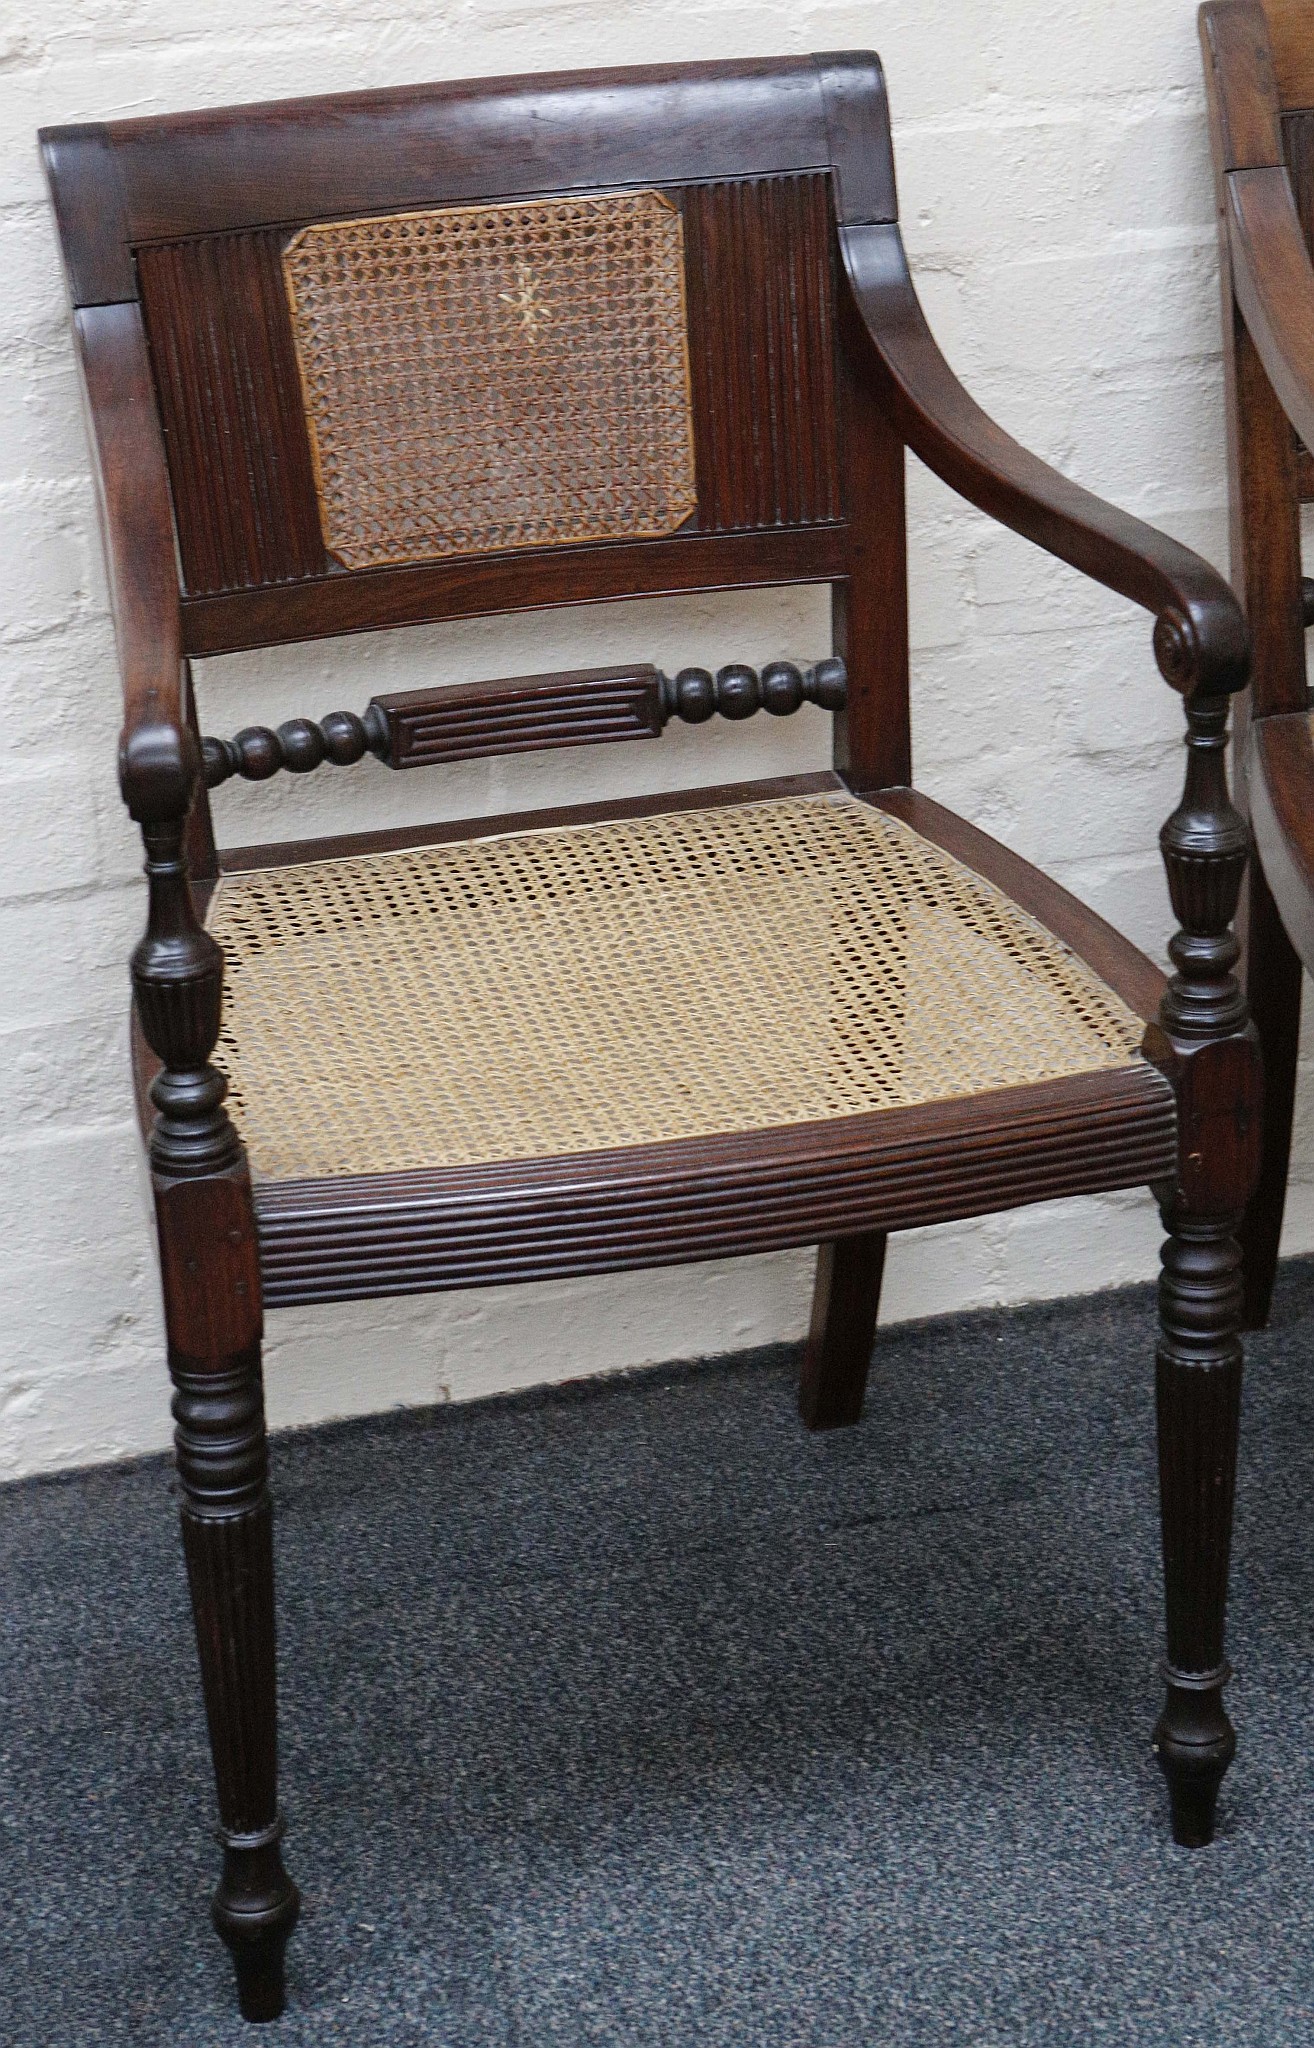 A pair of 19th century Anglo Indian rosewood armchairs, cane back an seat, turned legs. - Image 2 of 3